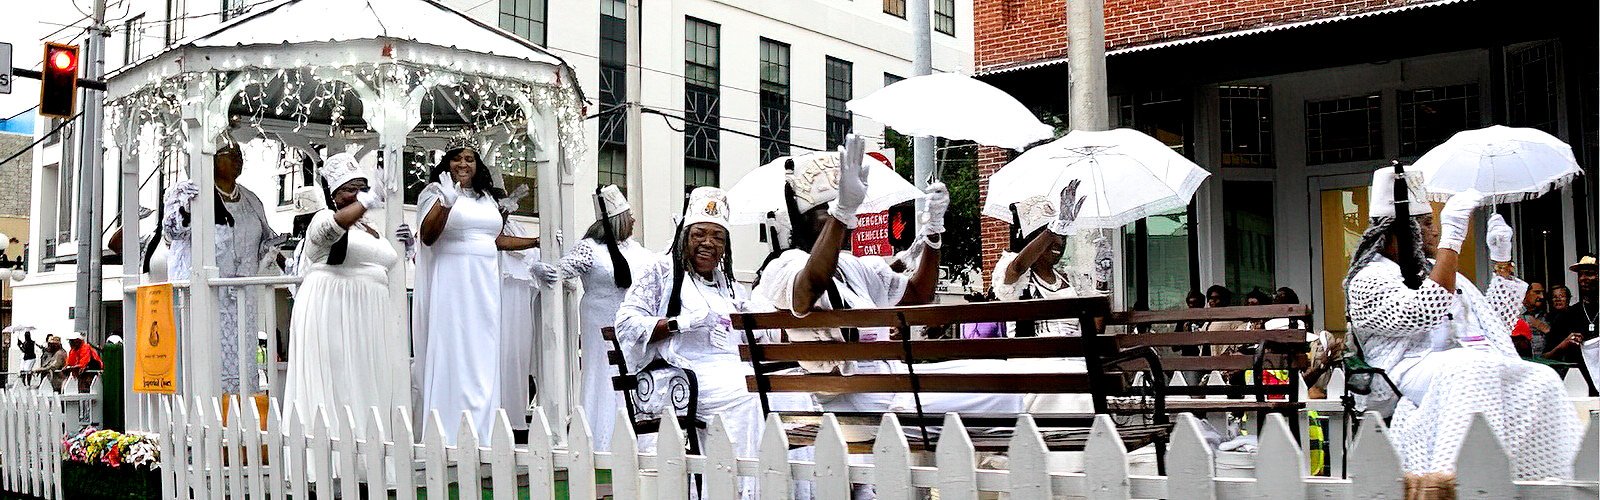 The Daughters of the Imperial Court with the Harram Court No. 96, Oasis of Tampa, take part in the parade of the Ancient Egyptian Arabic Order Nobles of the Mystic Shrine (AEAONMS) in Ybor City on August 23.